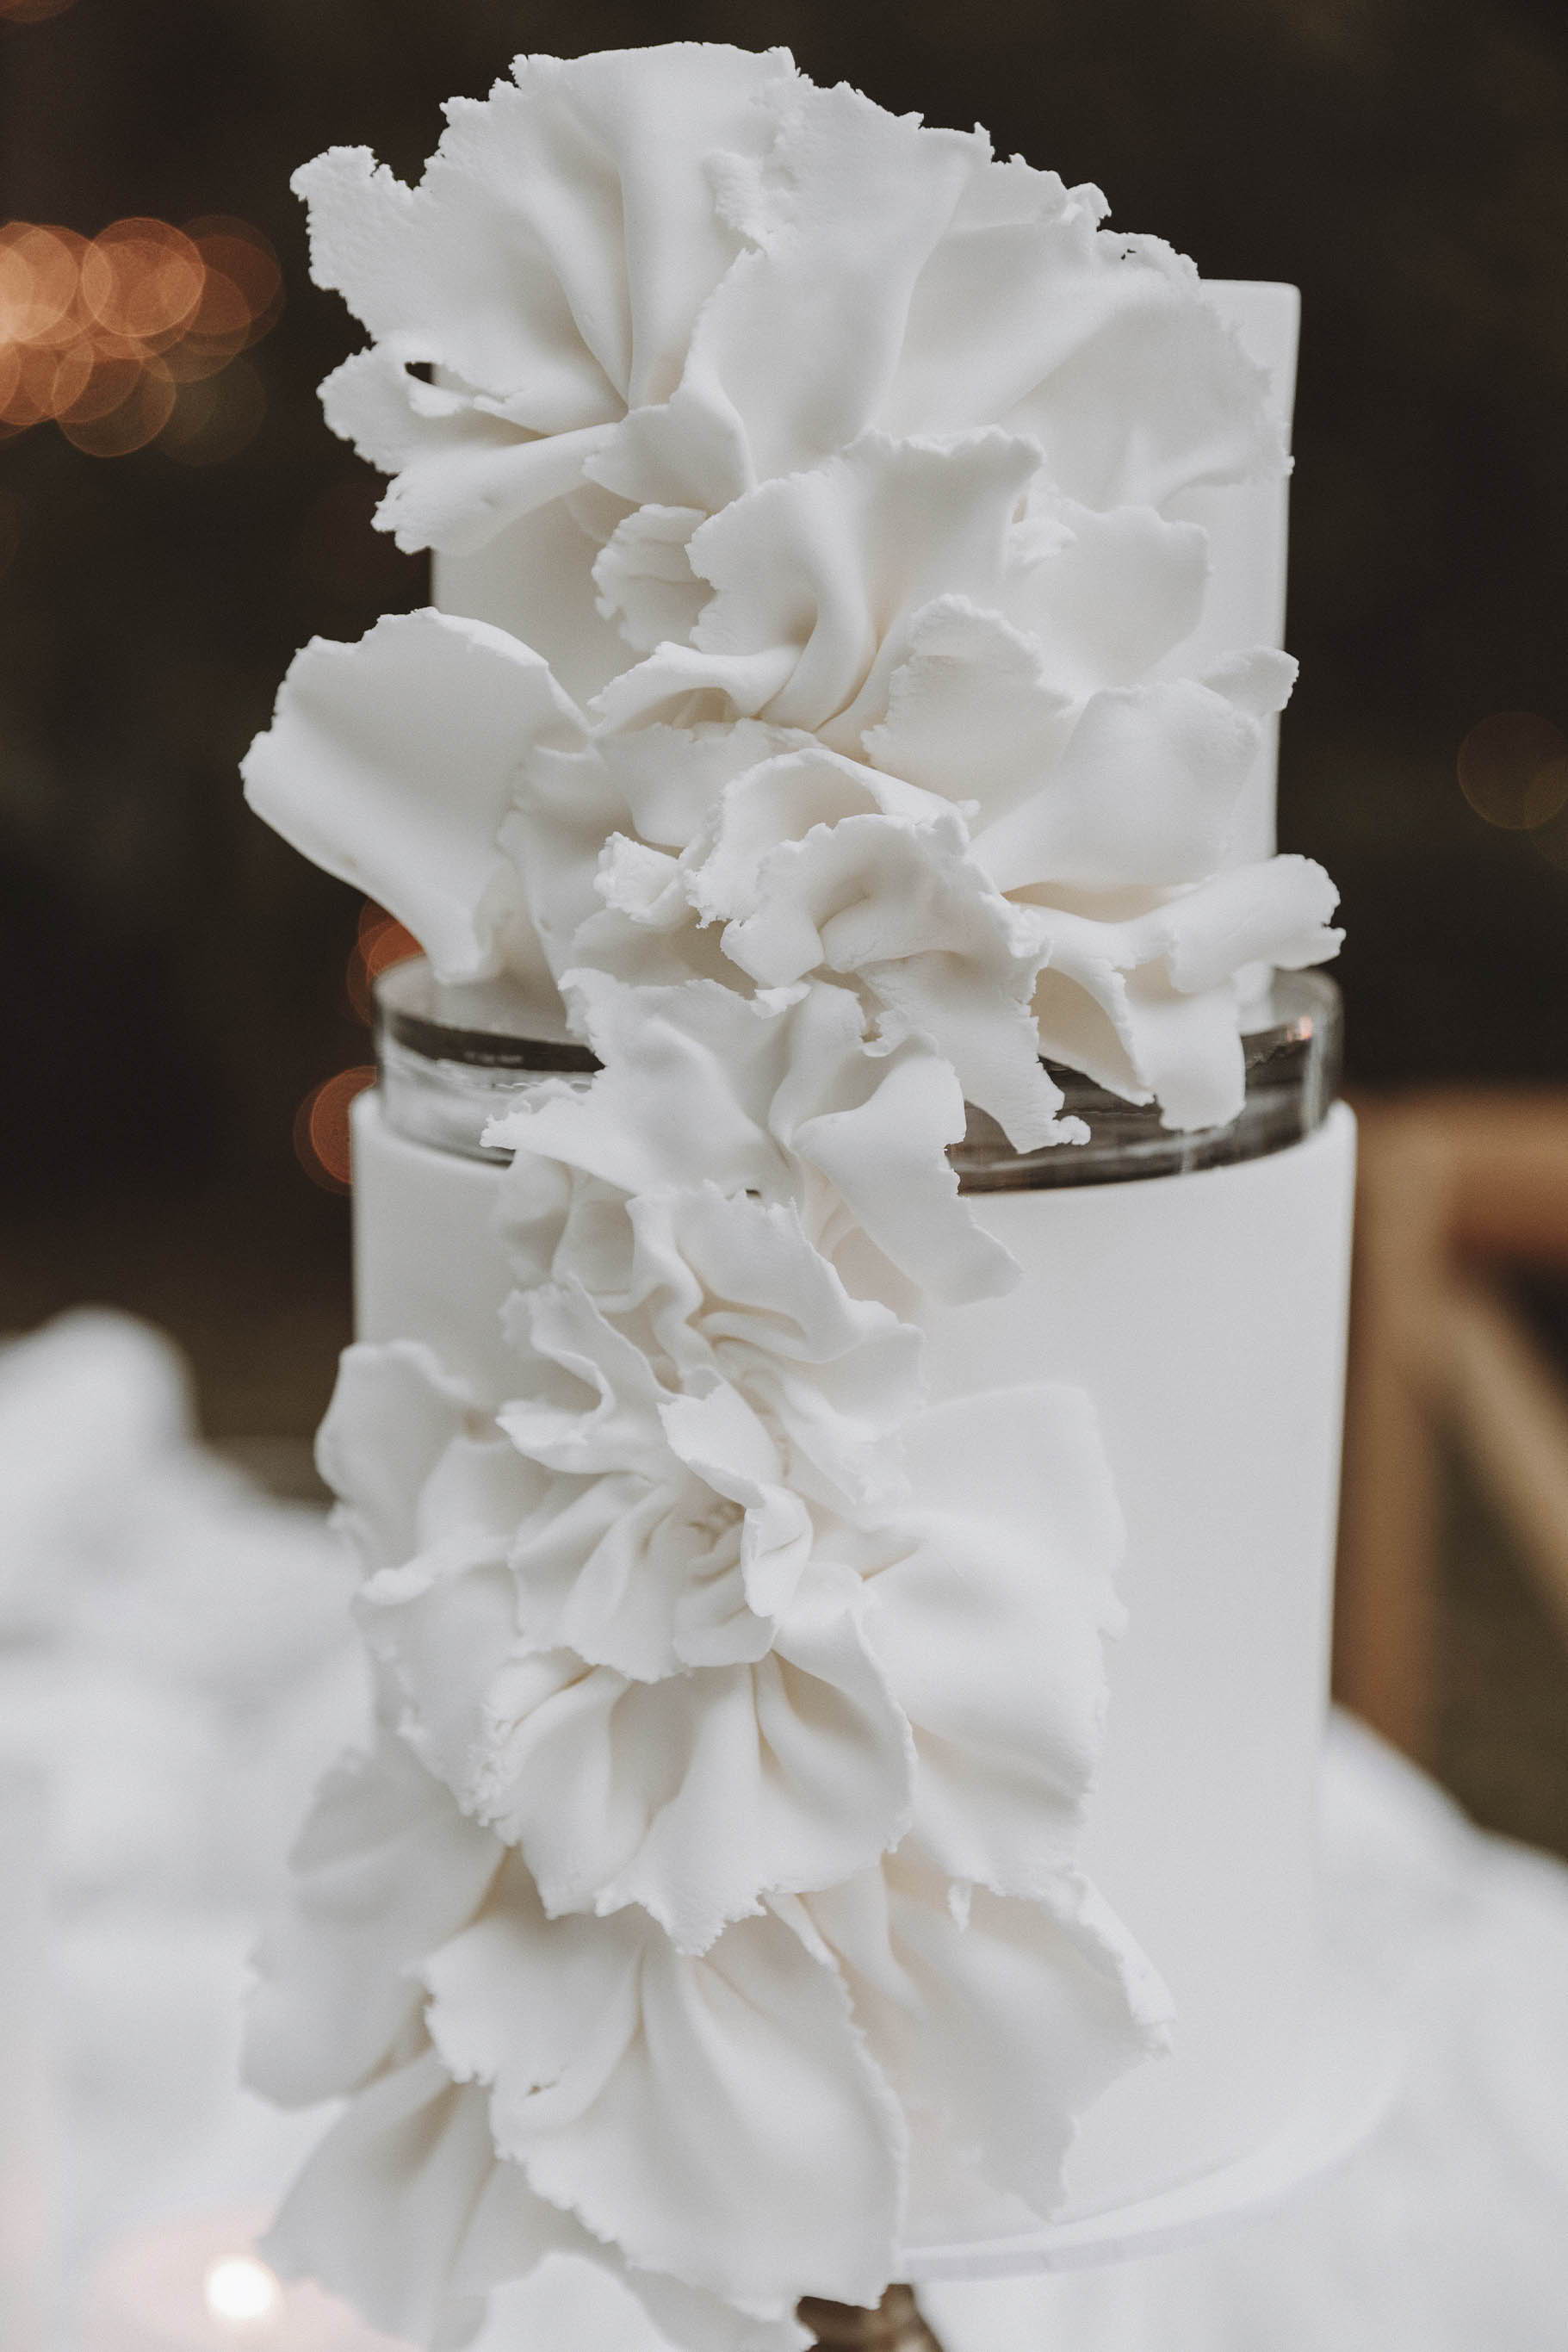 White wedding cake with white floral arrangement on top